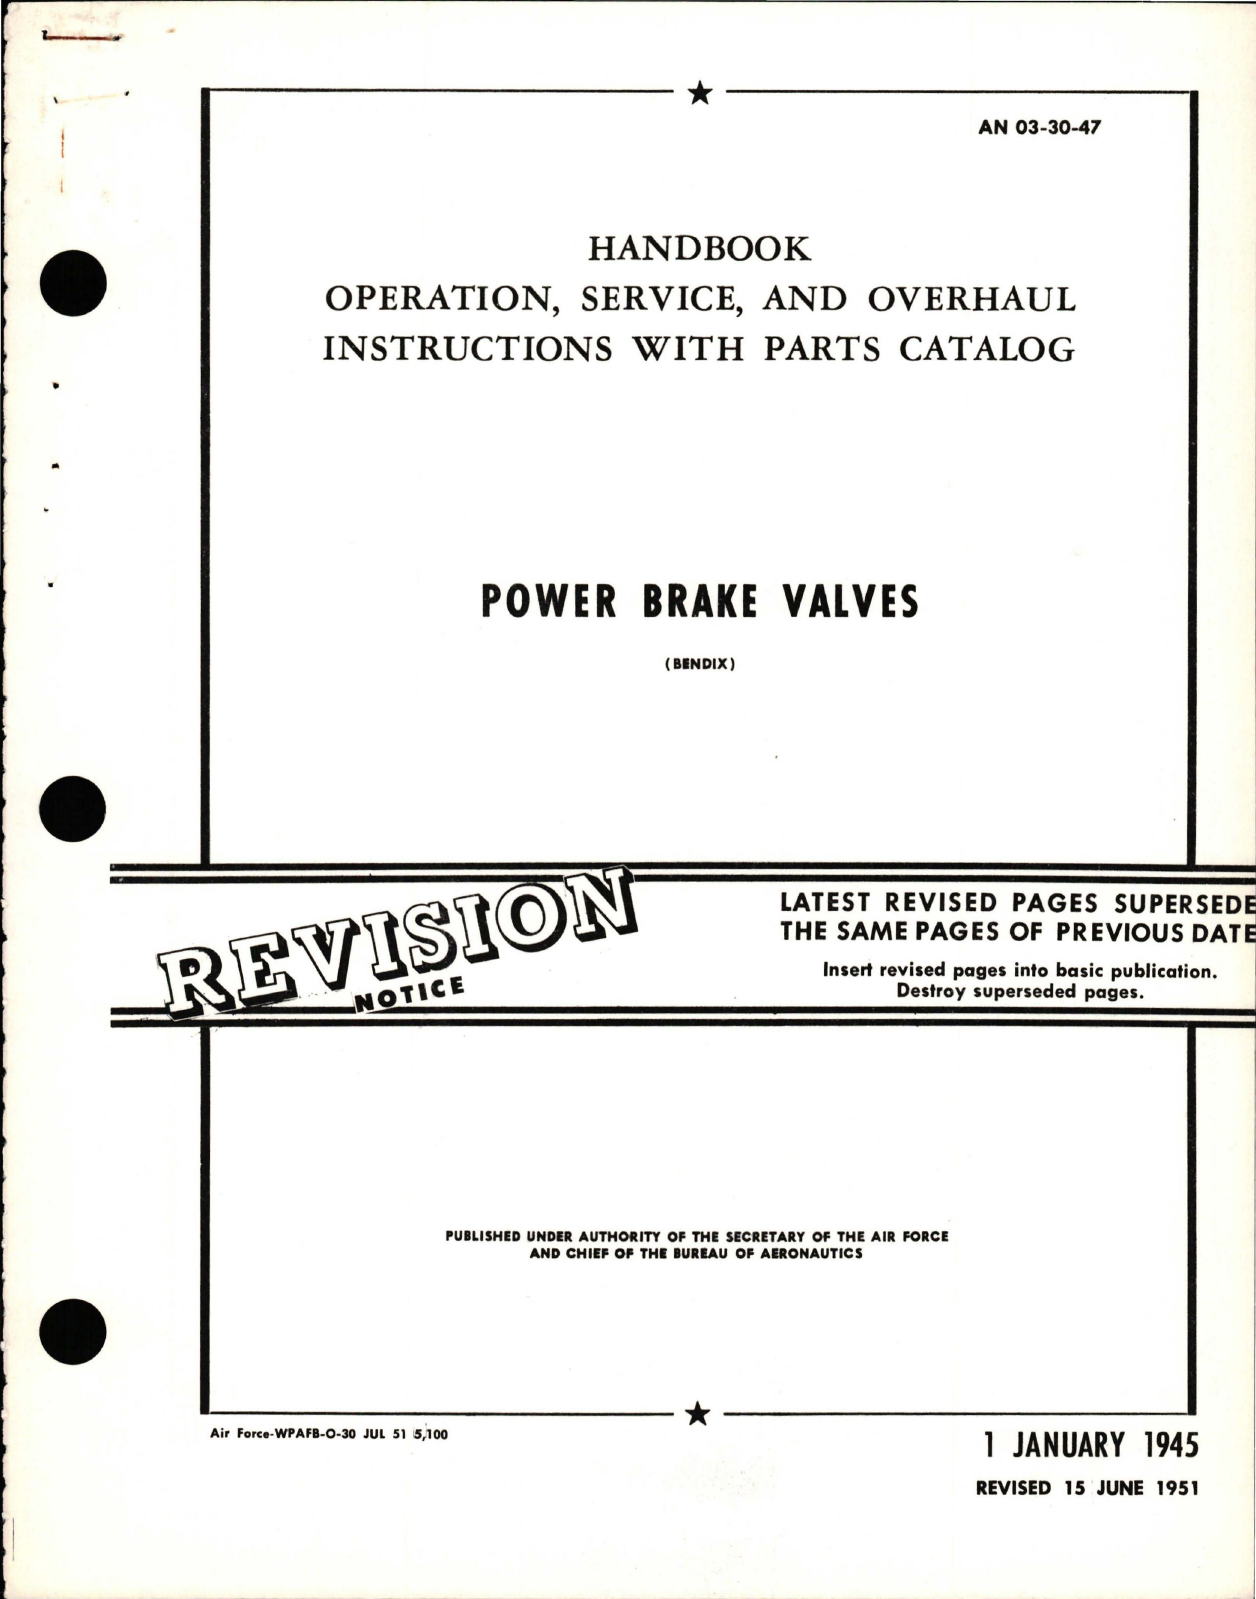 Sample page 1 from AirCorps Library document: Operation, Service, and Overhaul Instructions with Parts Catalog for Power Brake Valves